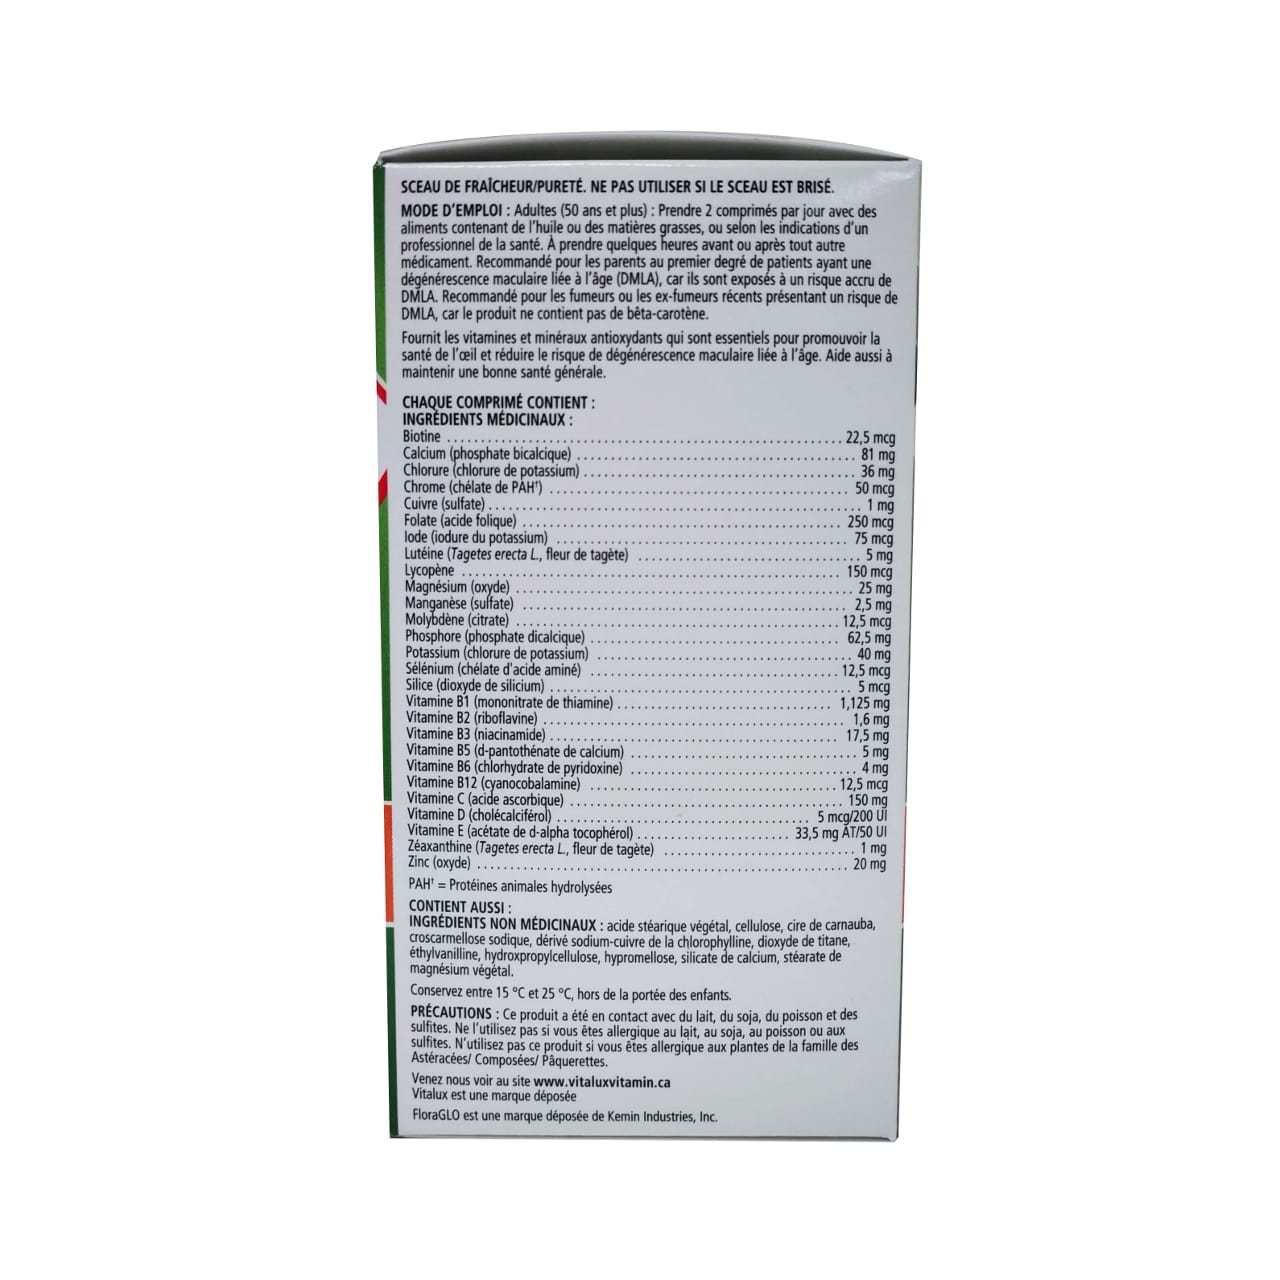 Product details, directions, ingredients, and warnings for Alcon Vitalux Healthy Eyes Complete Multivitamin in French